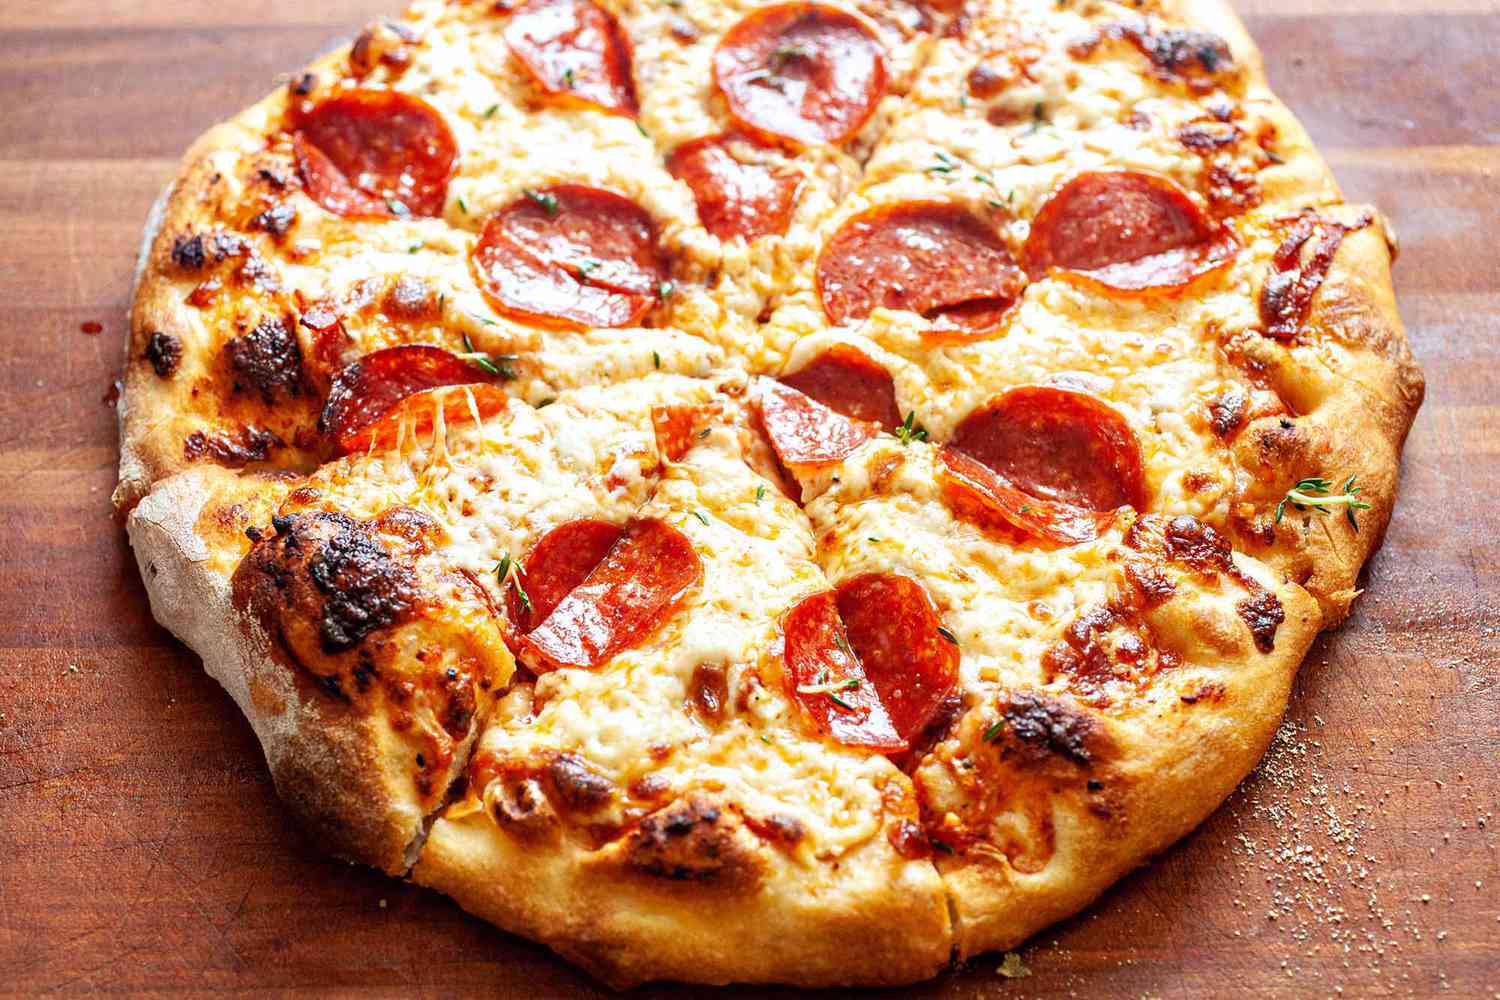 Image of pepperoni pizza